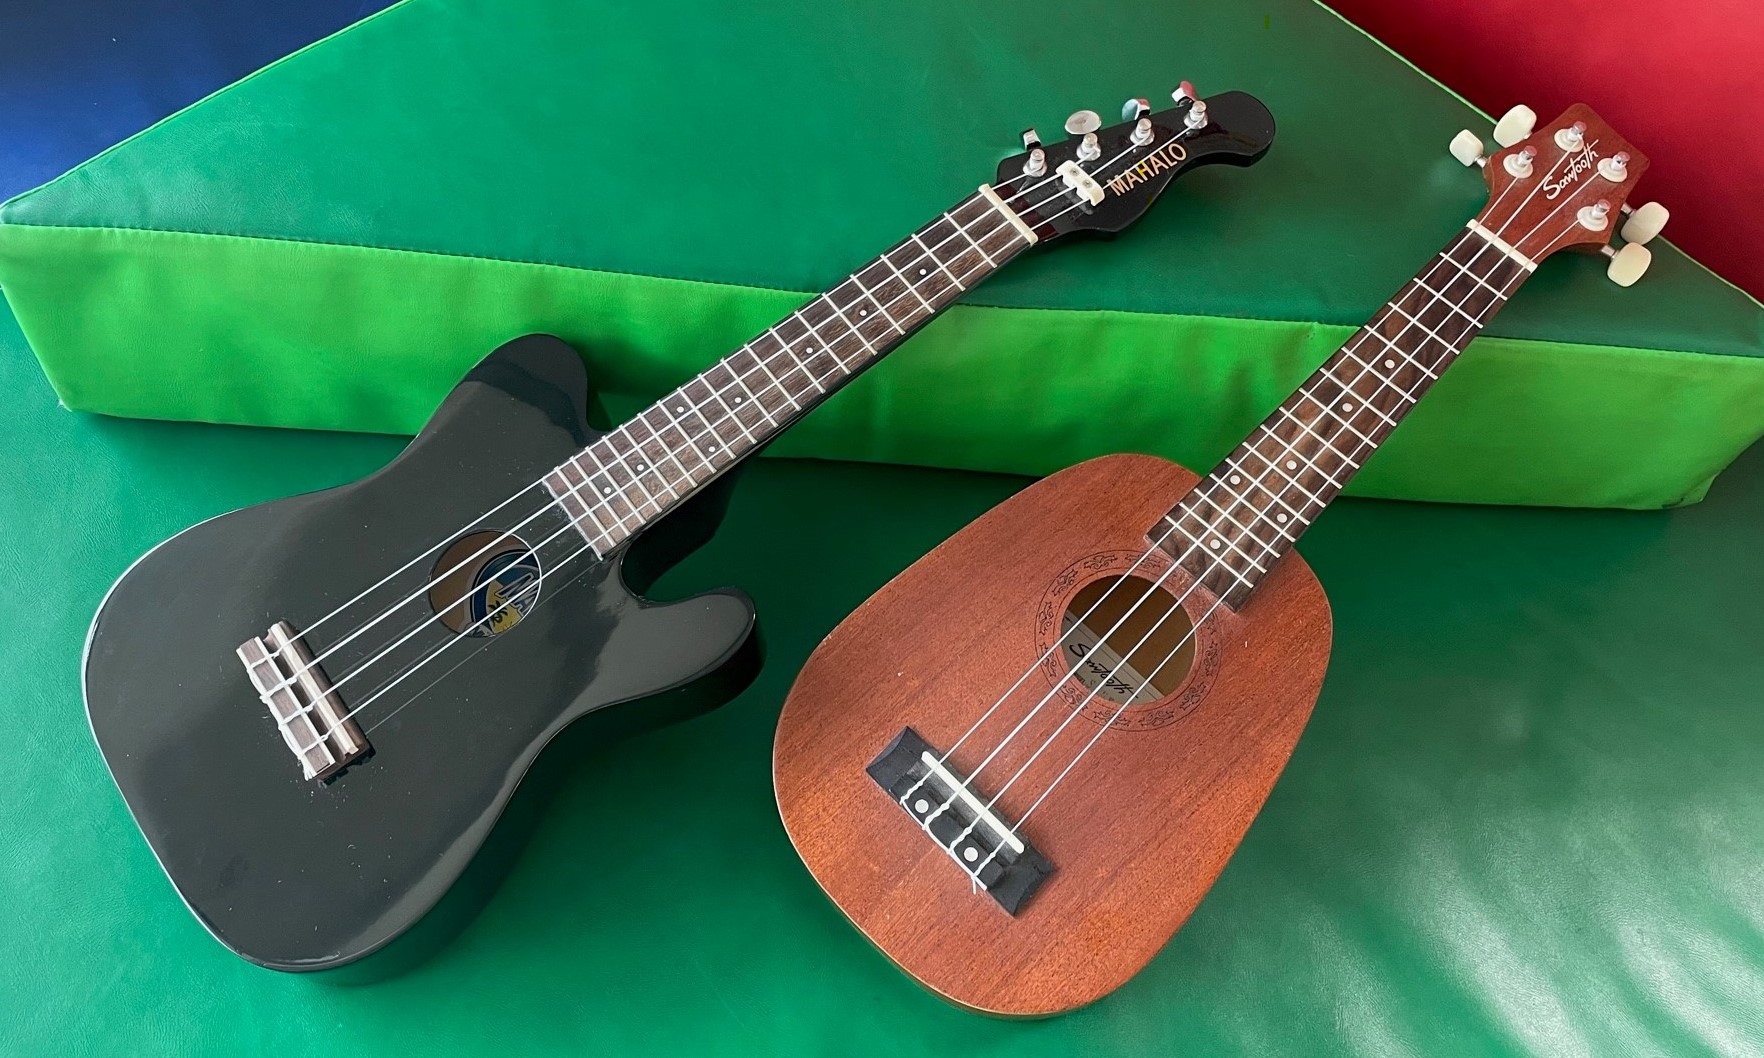 Two ukuleles against a multi-colored background